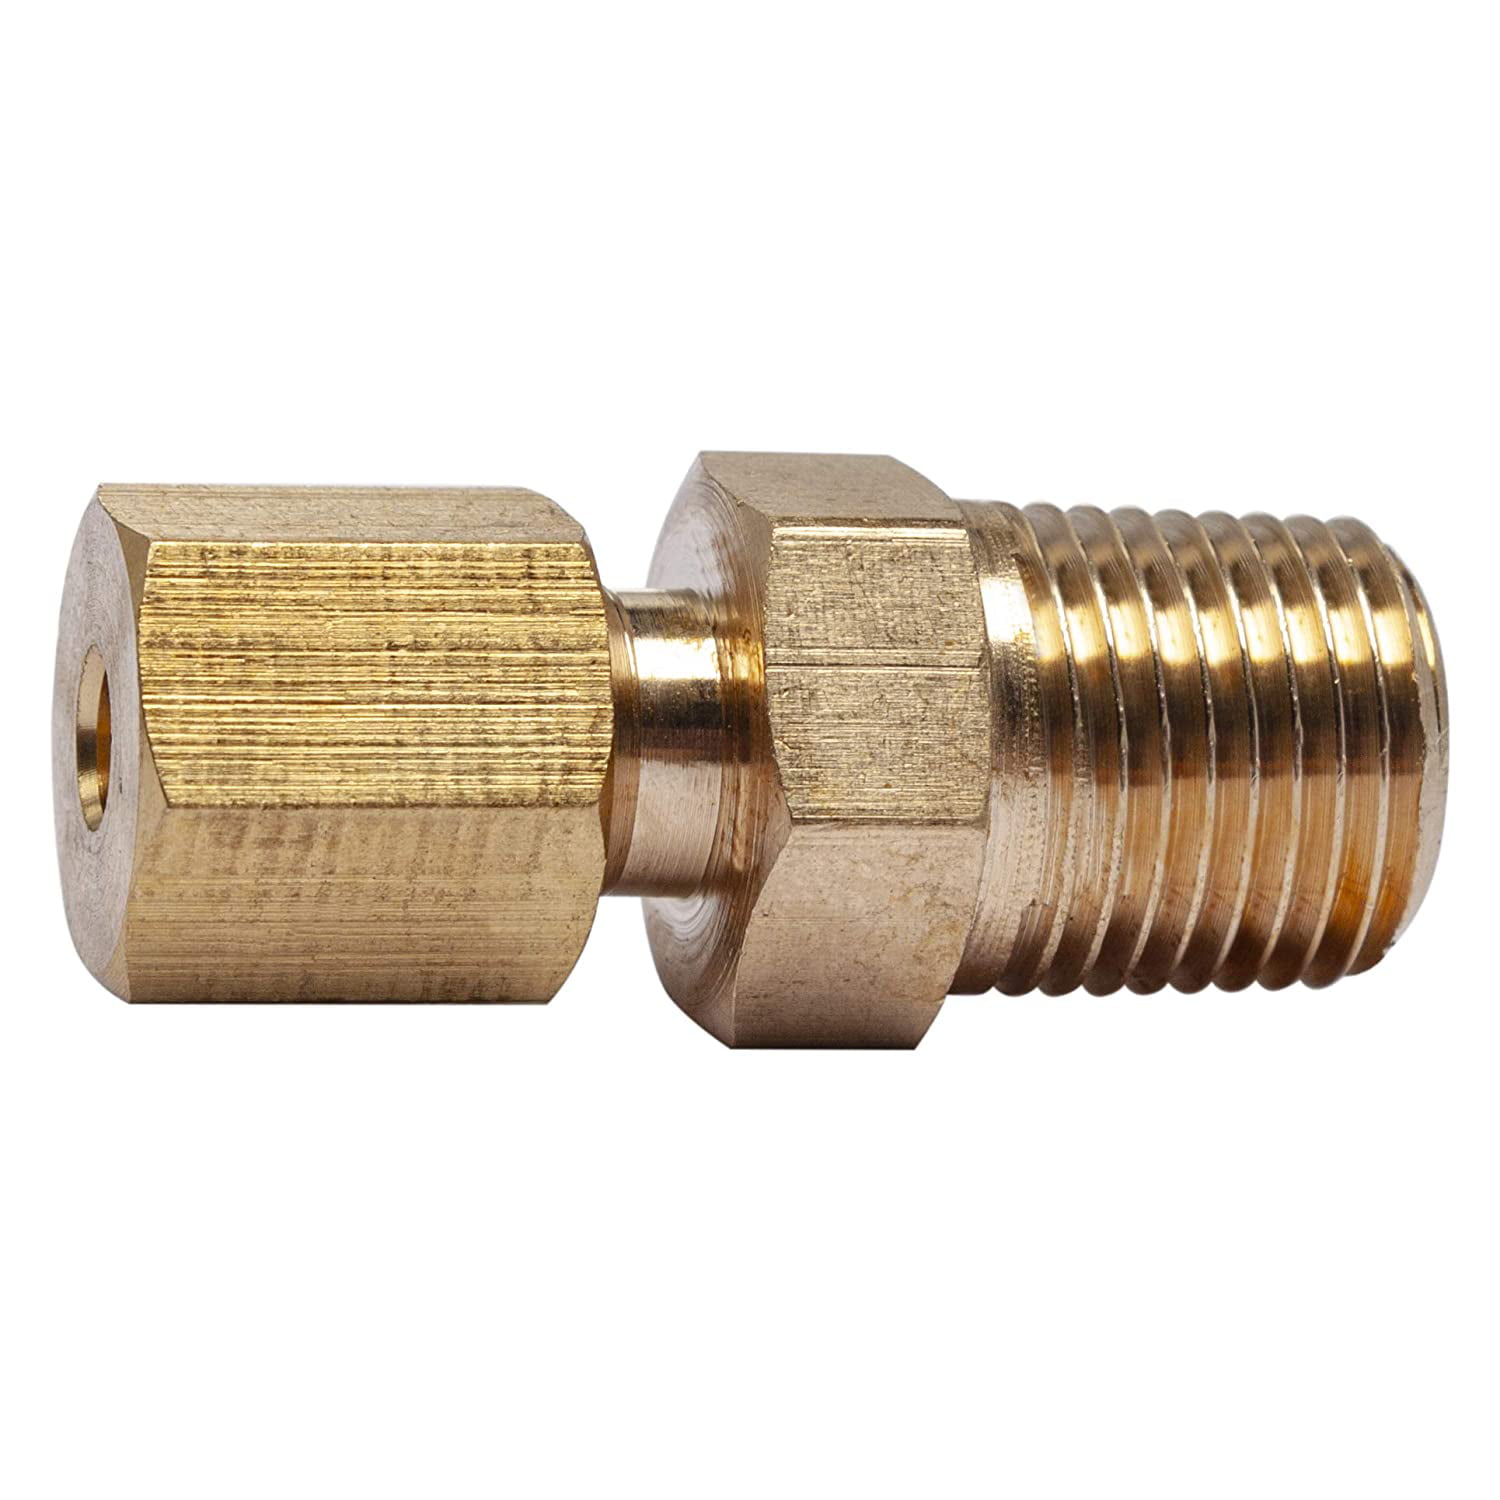 Air Line Hose Fitting Connector Adapter 1/4 inch to 1/8 BSP Female Thread Bush 